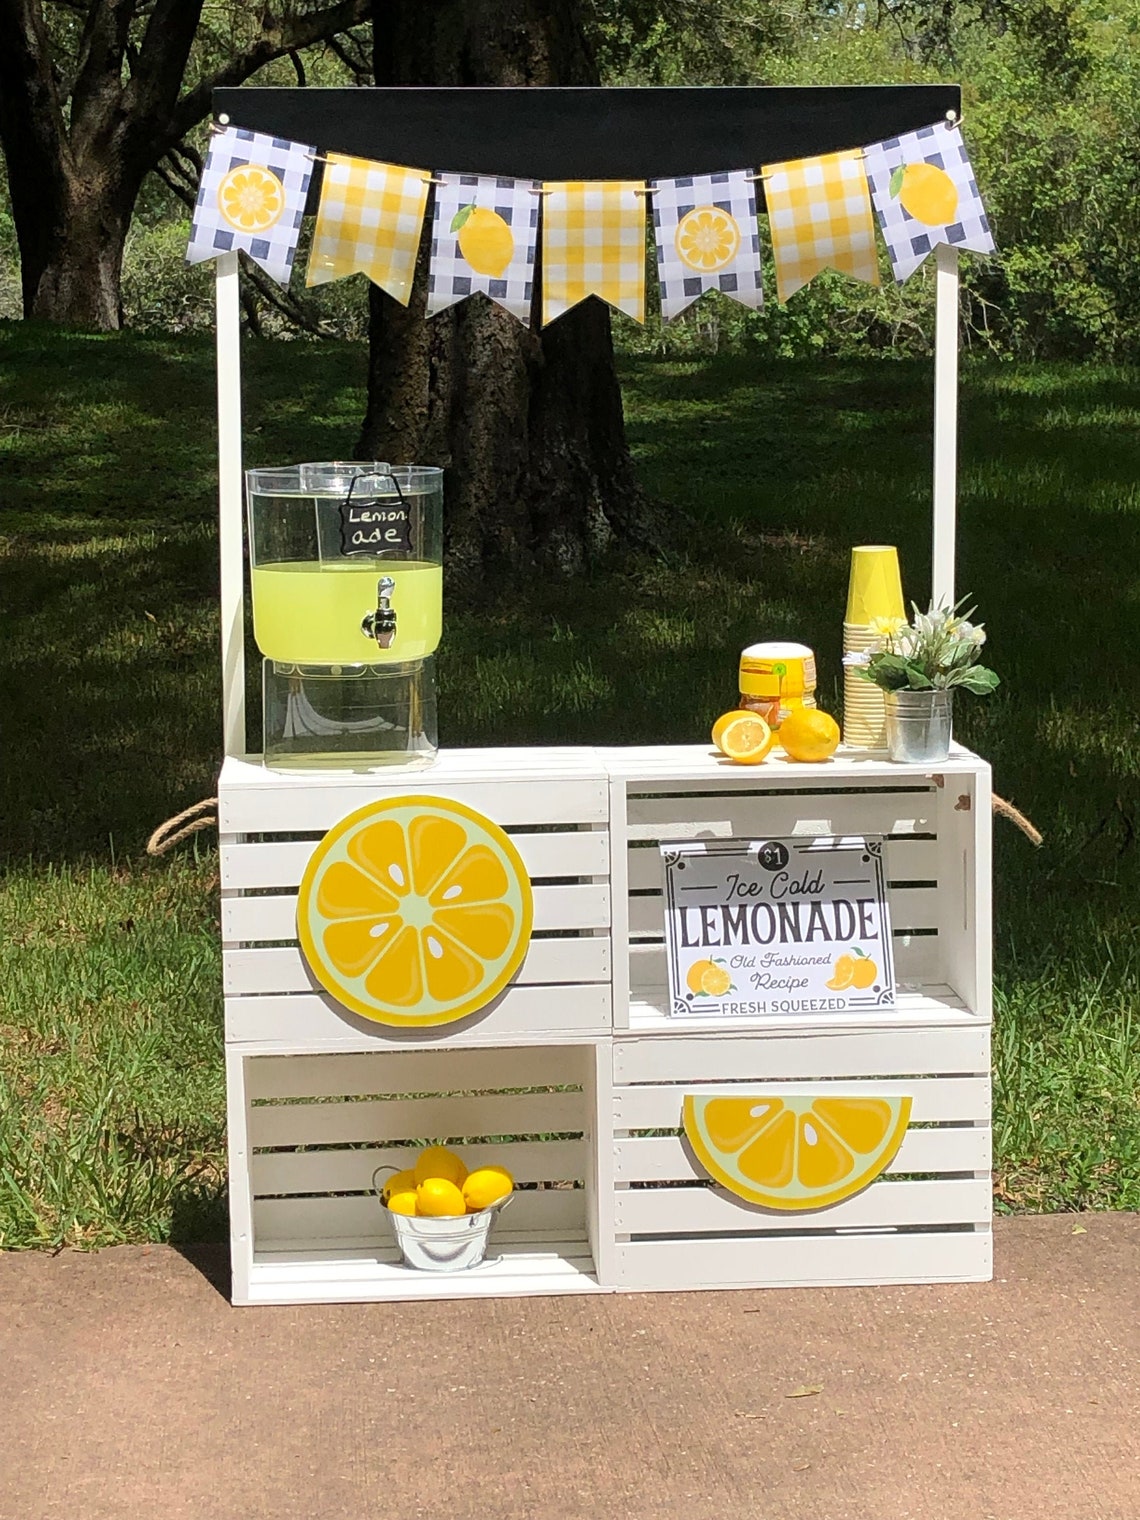 Lemonade Stand Complete With Accessories and Decor - Etsy